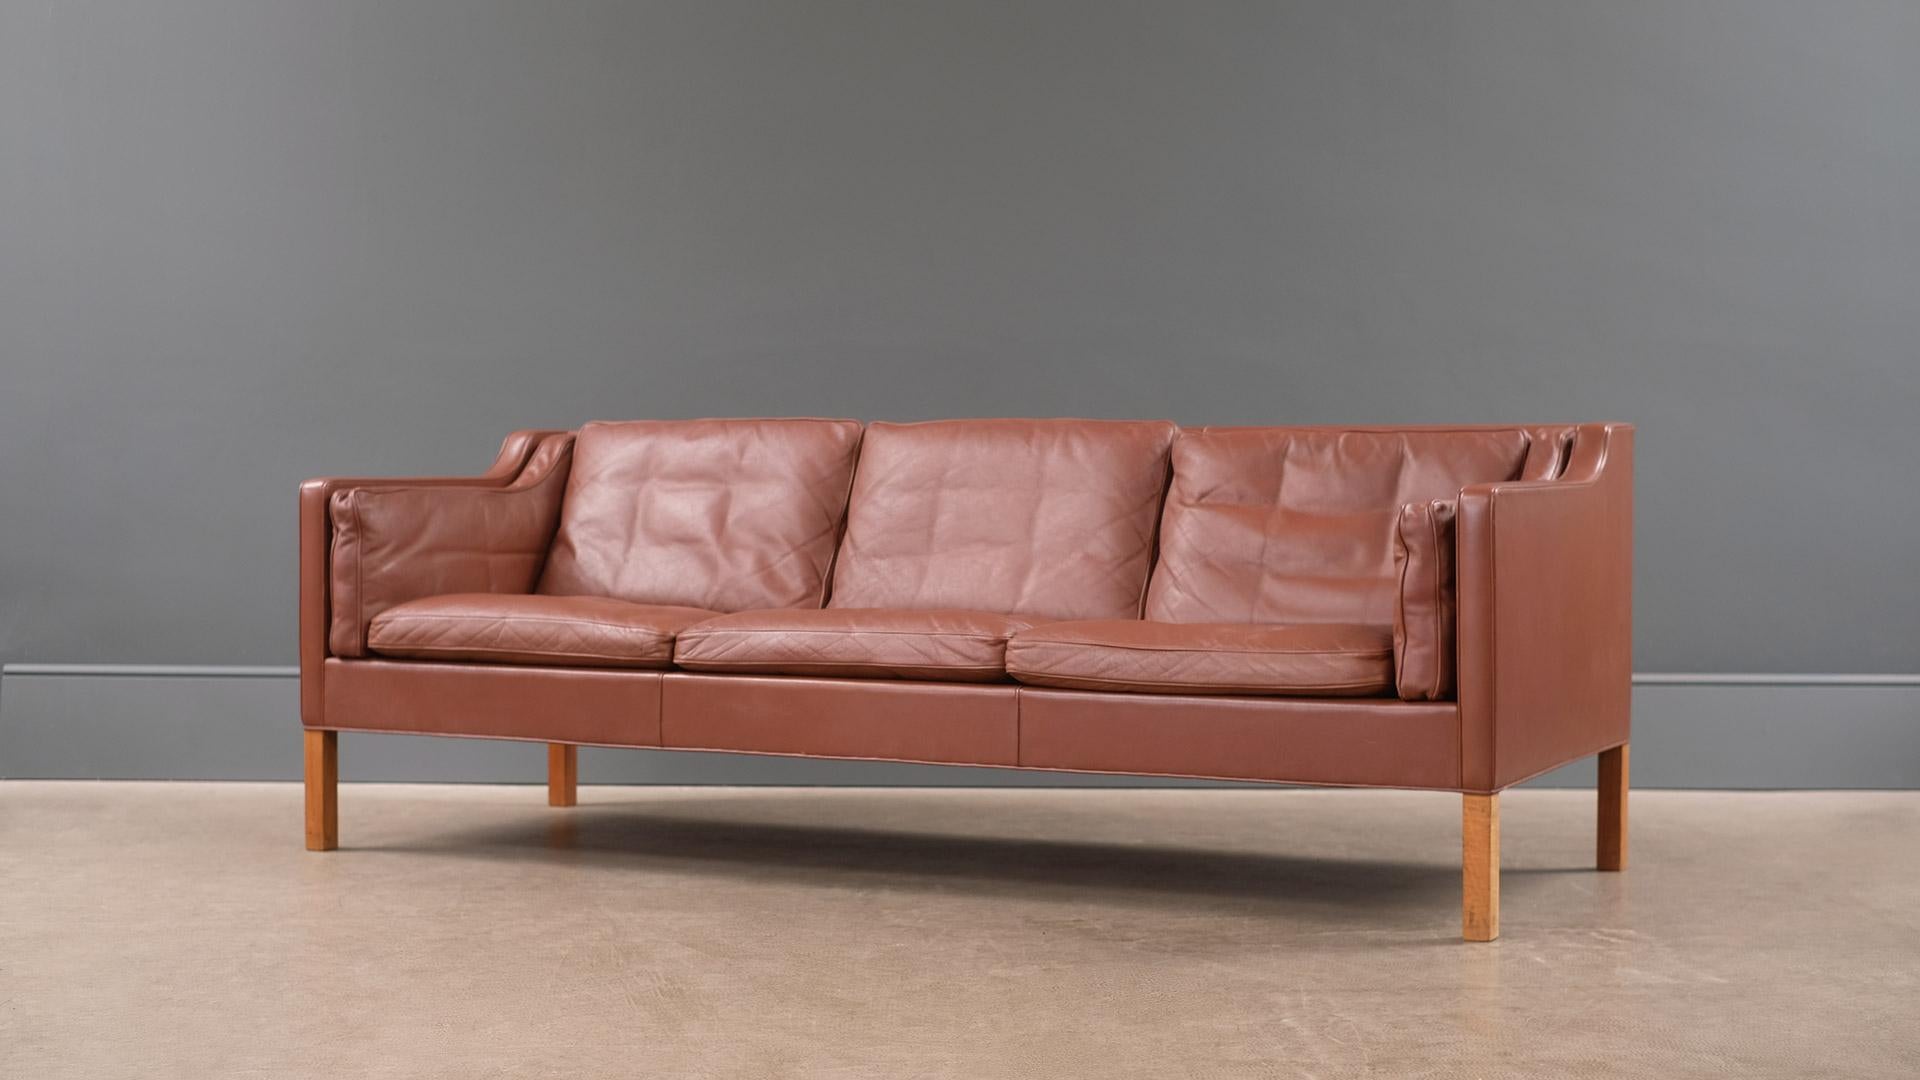 The real thing… Fantastic example of the Classic 3-seat sofa designed by Borge Mogensen for Fredericia, Denmark model 2213. Unsurpassed quality and in beautiful patinated tan leather with solid beech legs. Wonderful sofa.